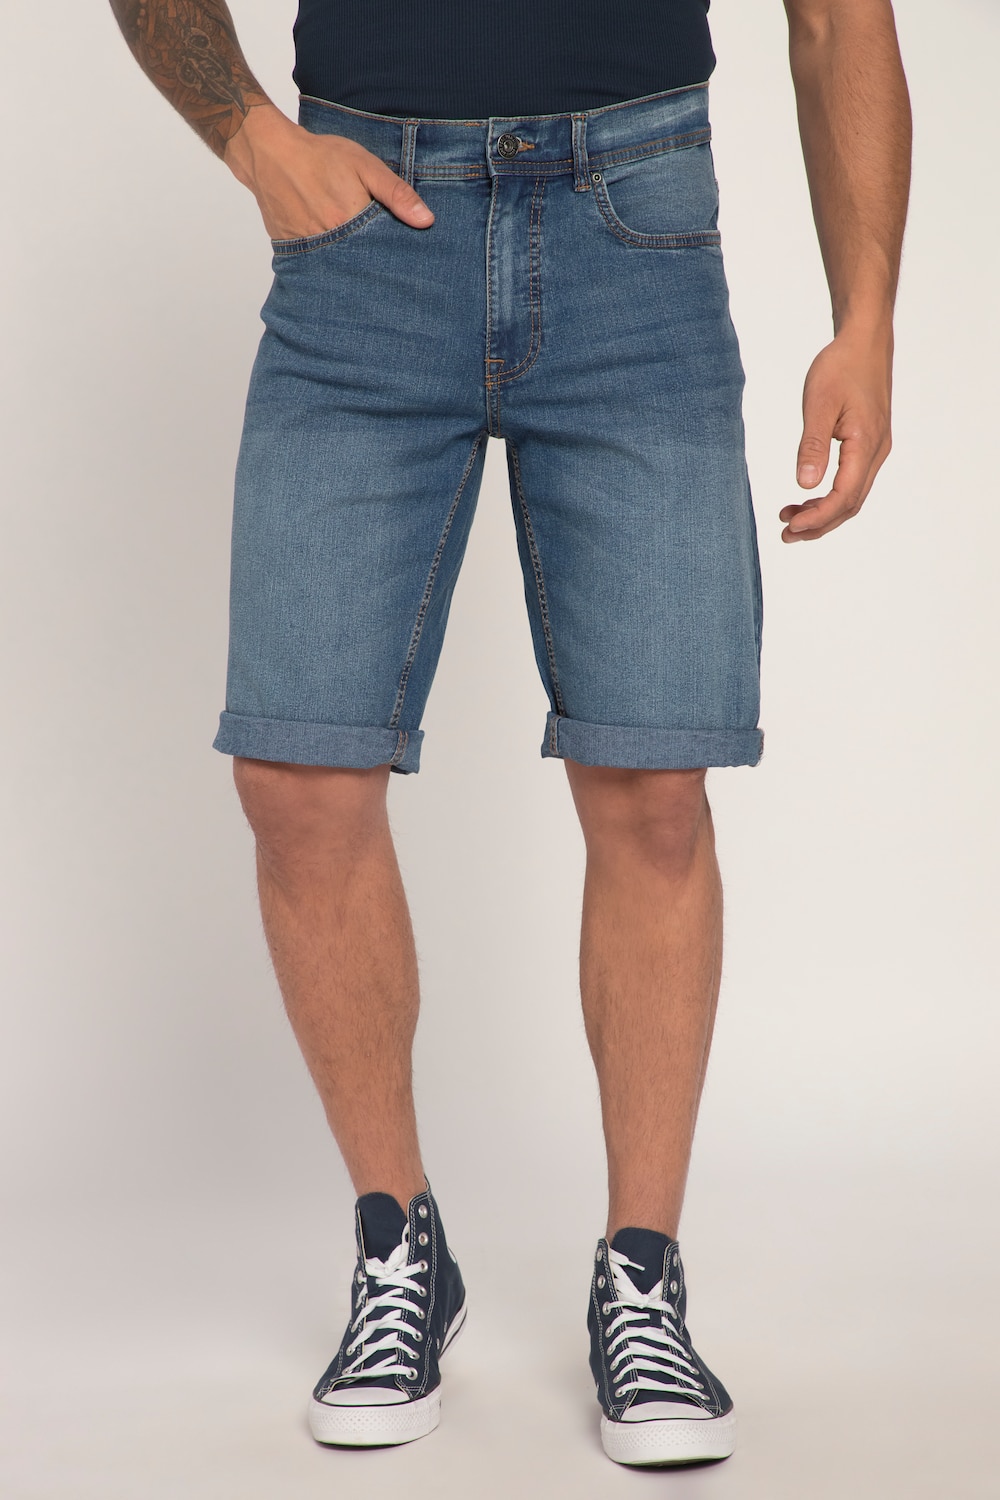 grandes tailles bermuda 5 poches. denim stretch - coupe regular fit, hommes, bleu, taille: 70, coton/polyester, jp1880